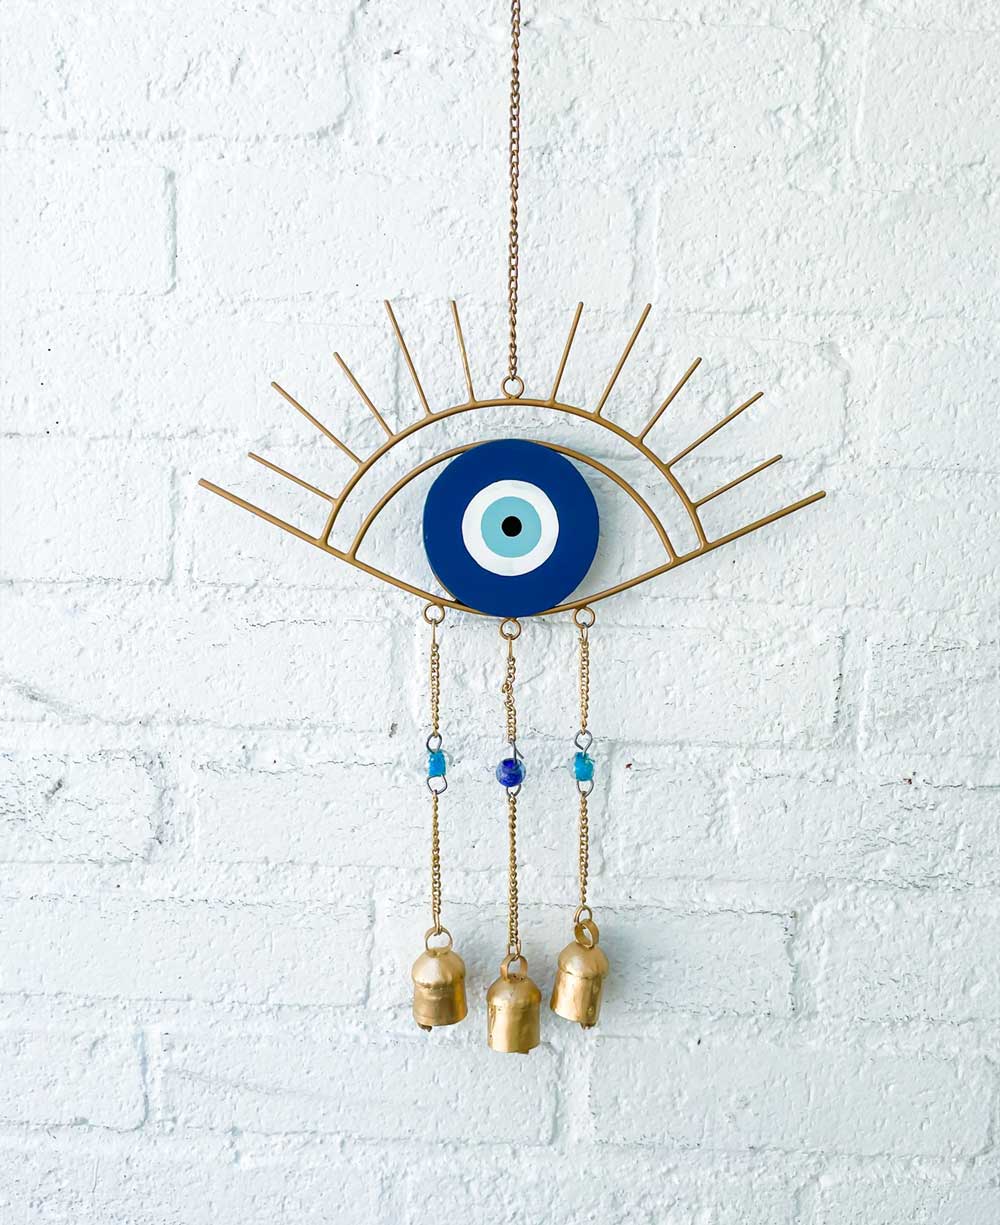 Hand-Painted Evil Eye Metal Chime Wall Hanging - Wind Chimes